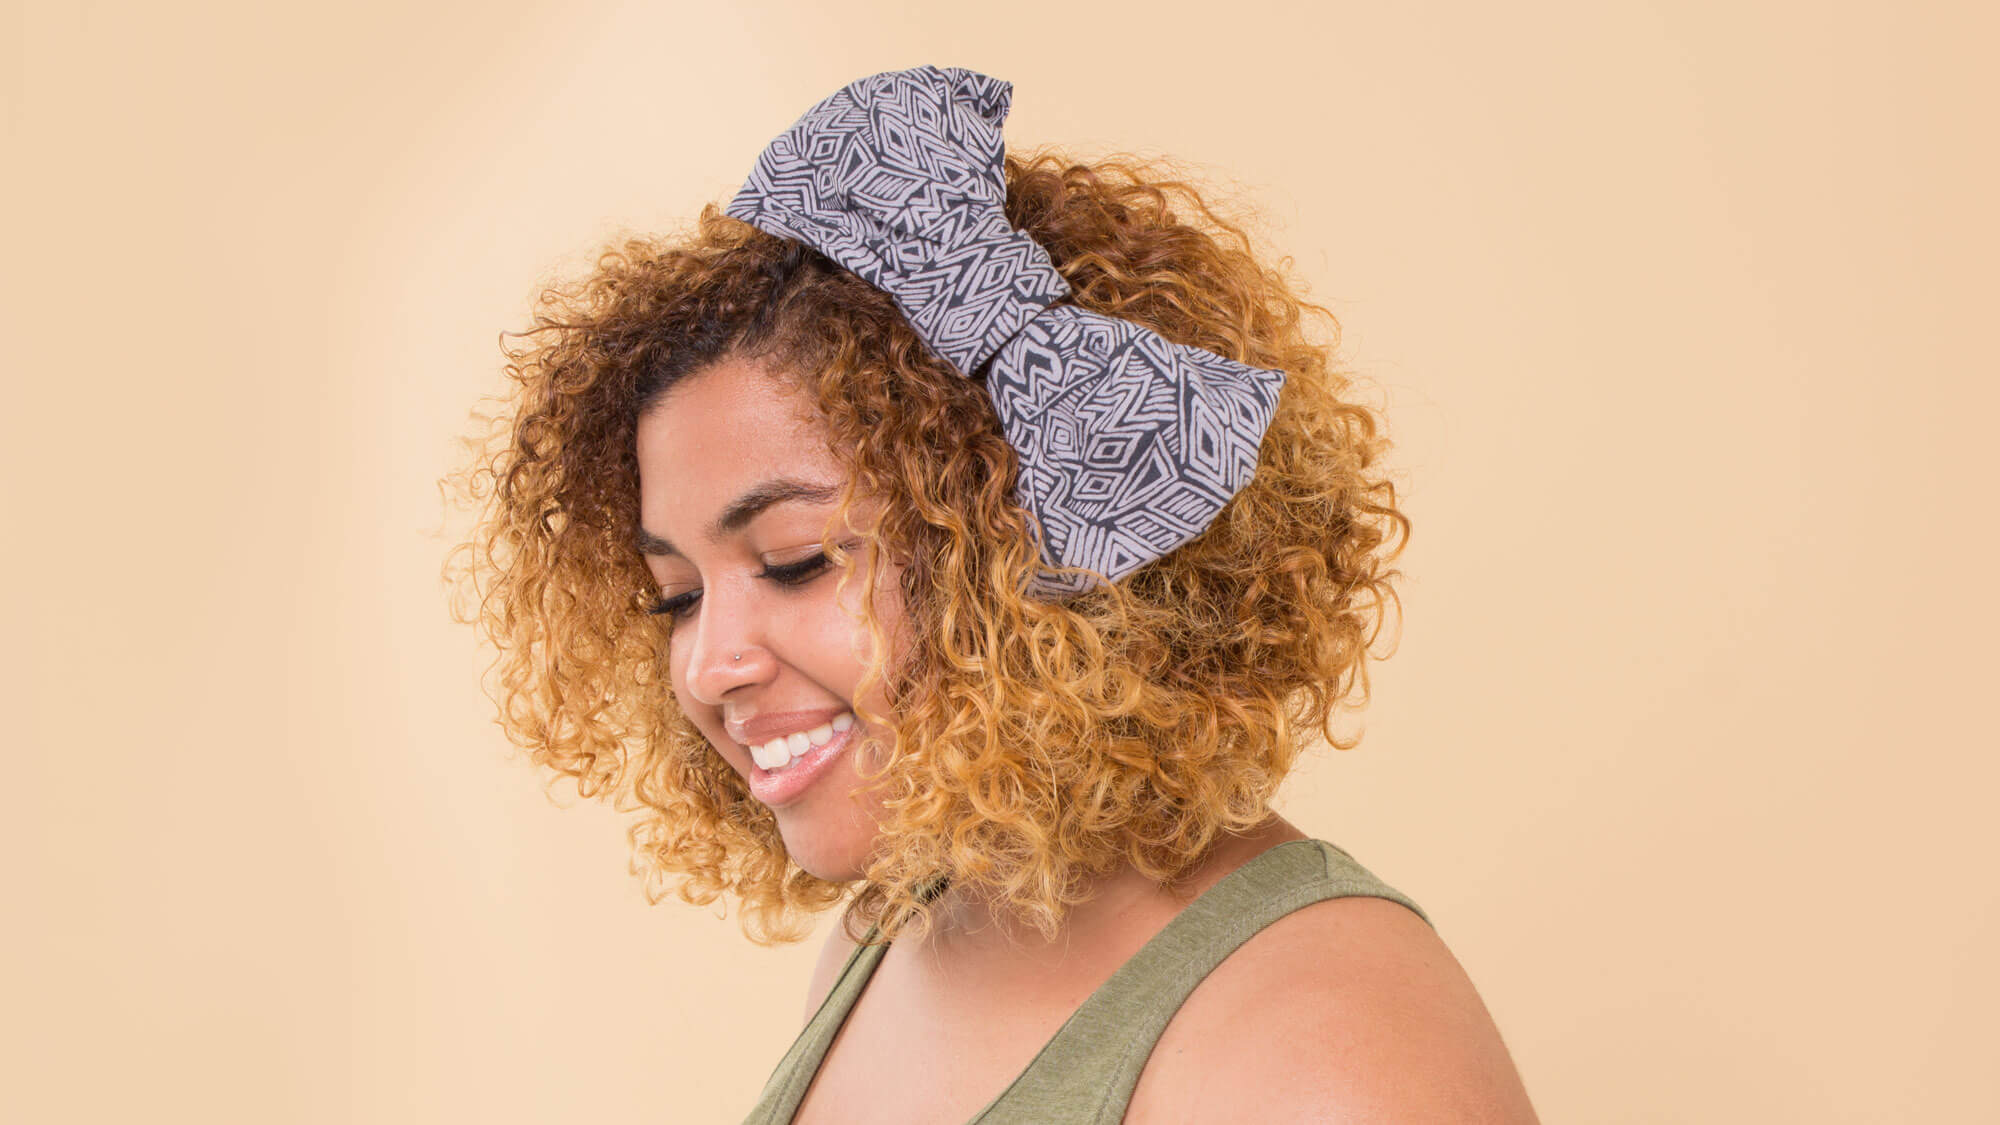 4 Ways to Style a Bandeau Headband!! These scrunch headbands are my fa